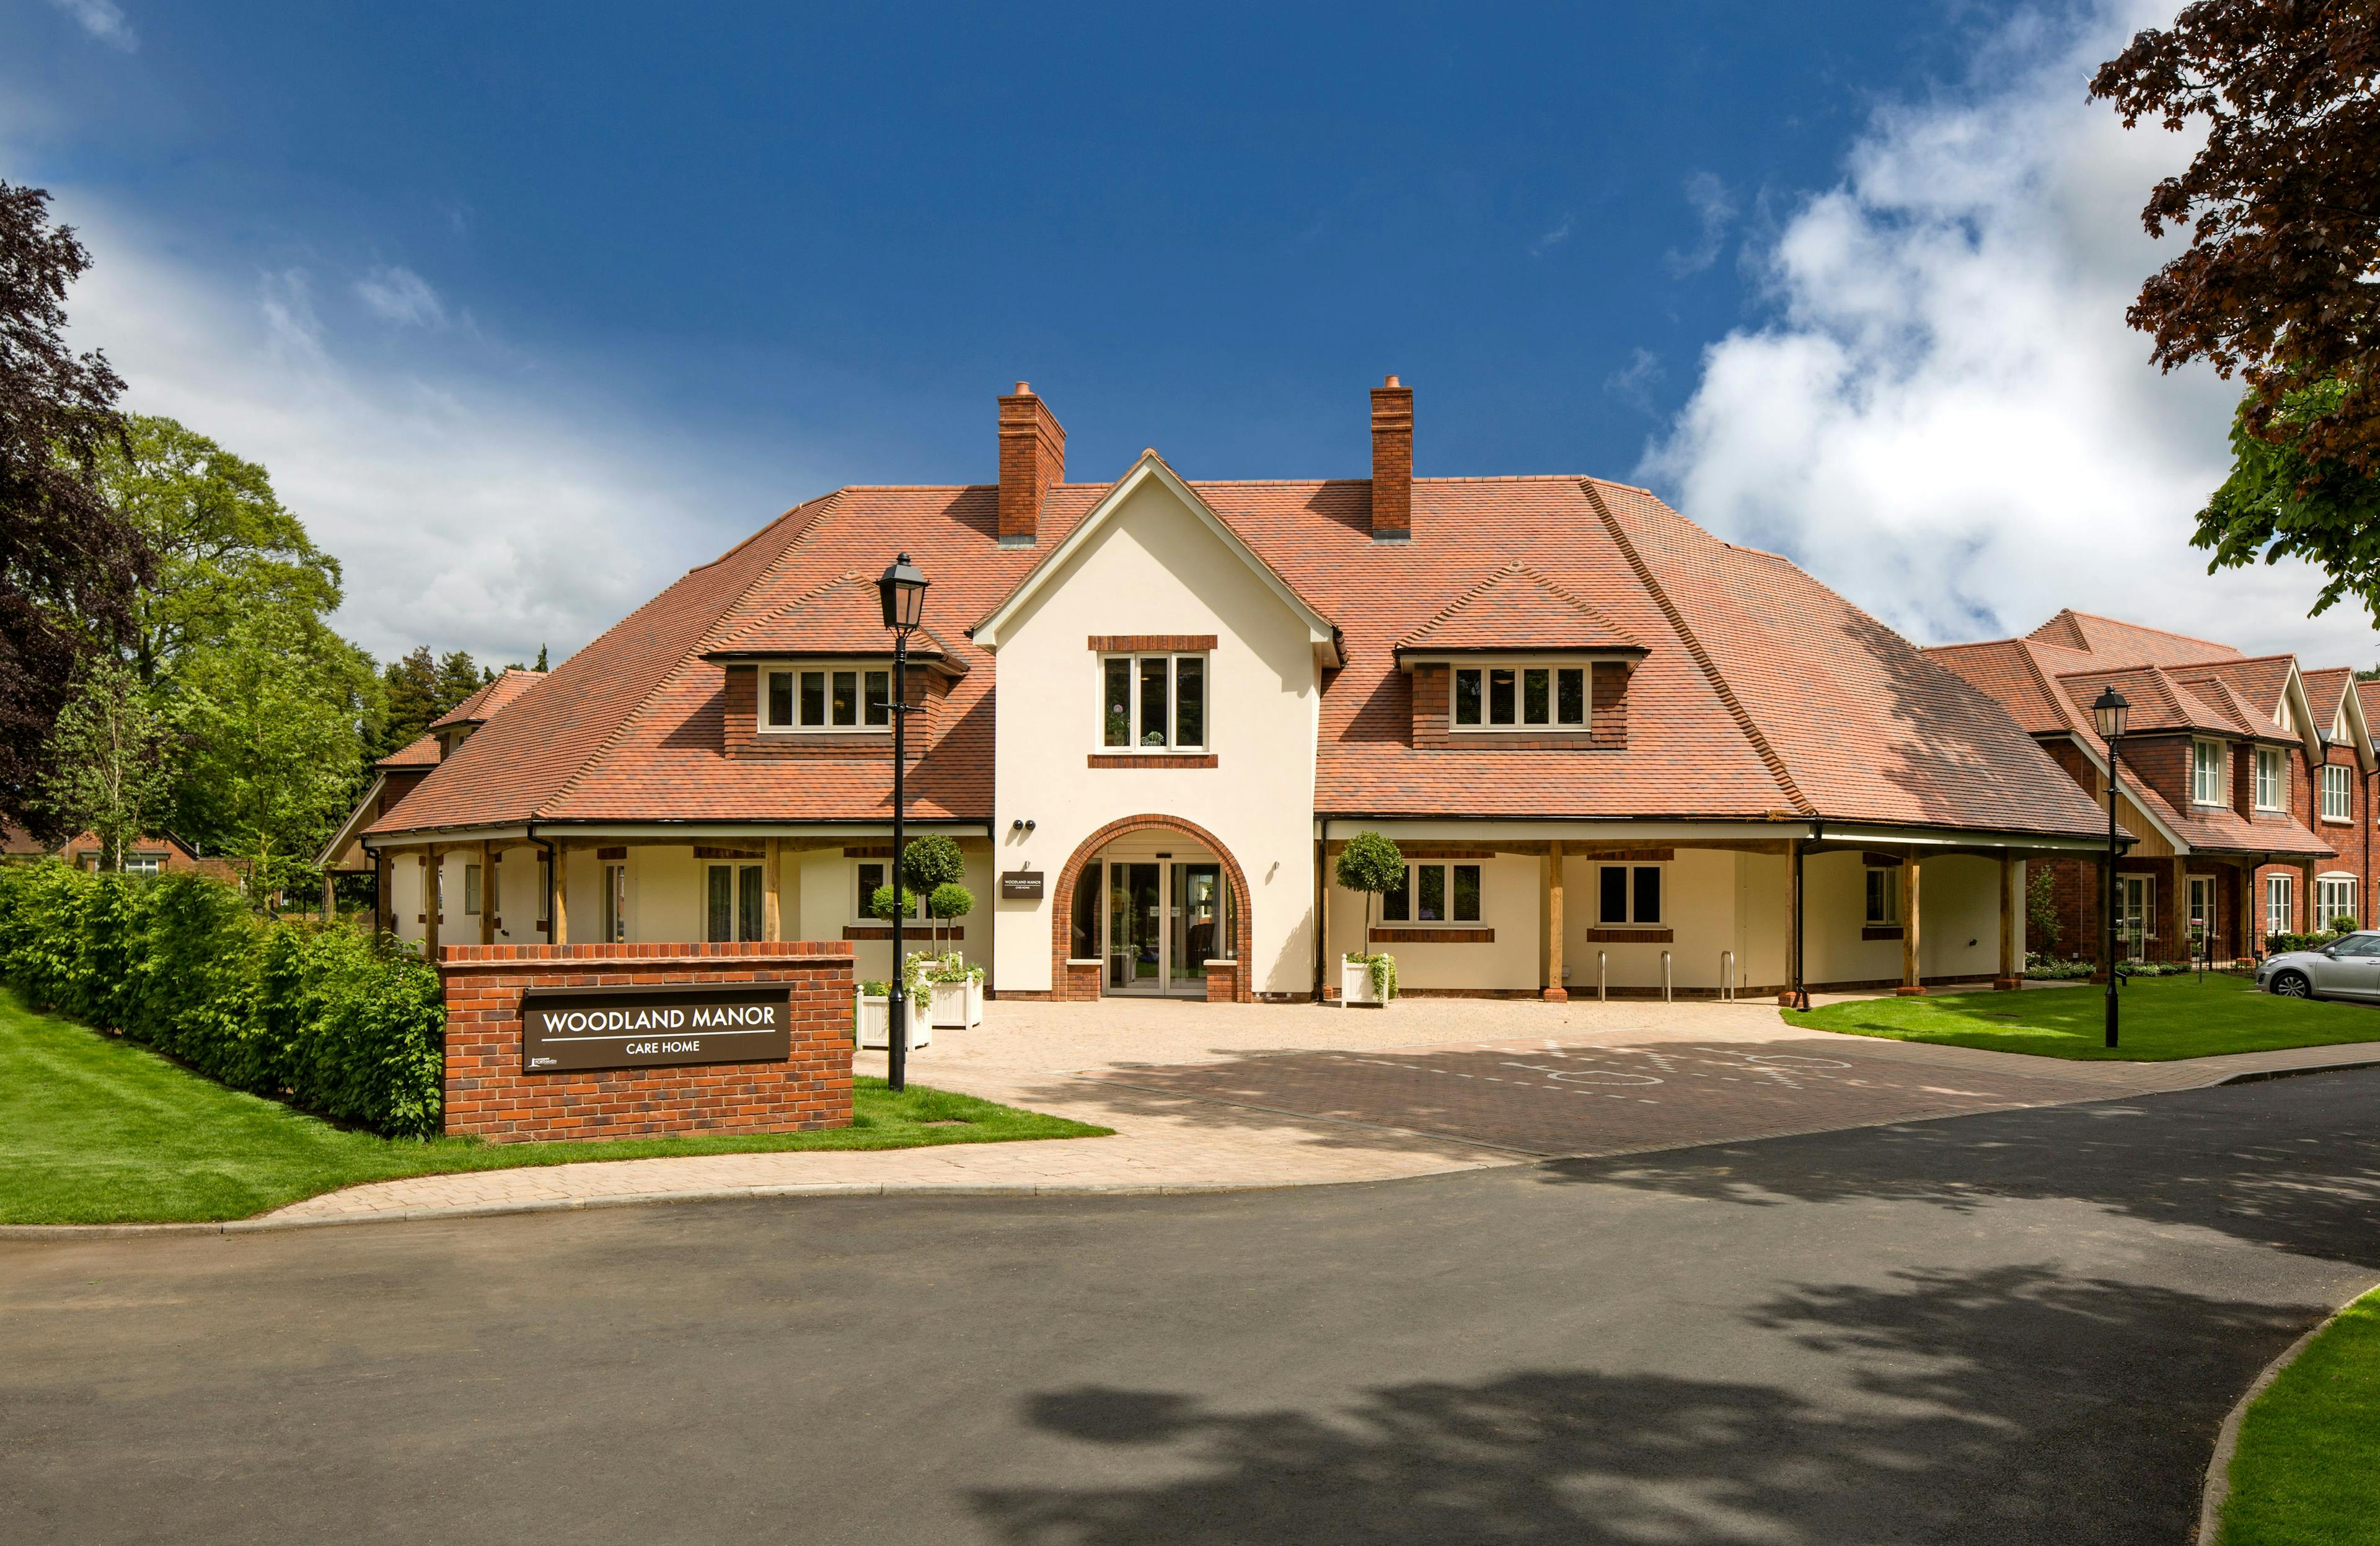 Porthaven Care Homes - Woodland Manor care home 3